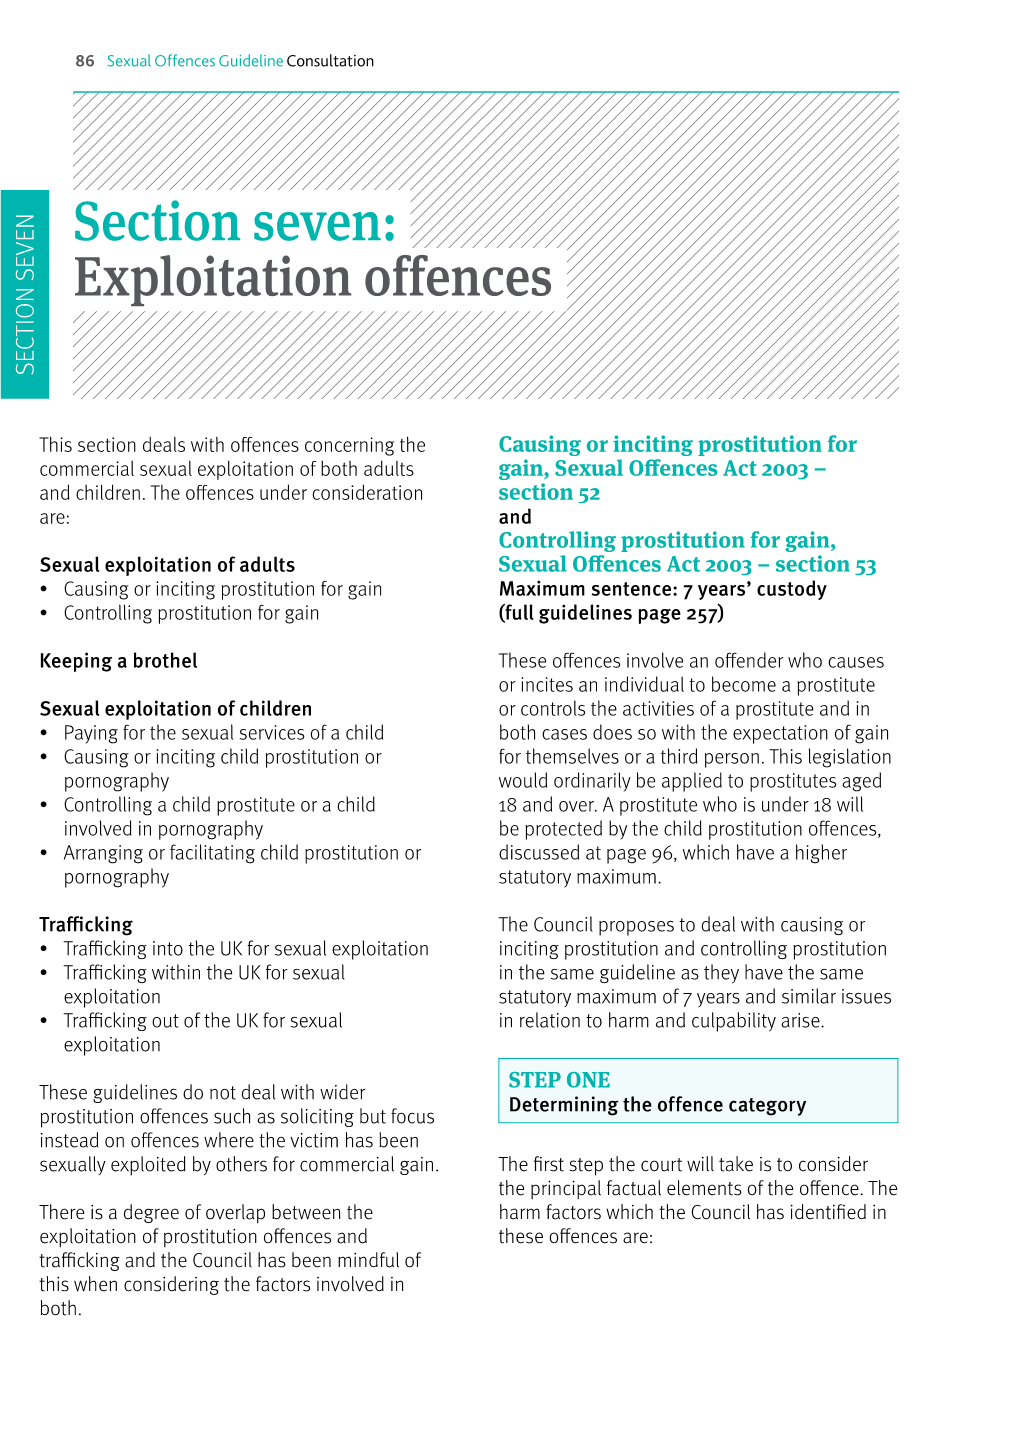 Sexual Offences Guideline Consultation